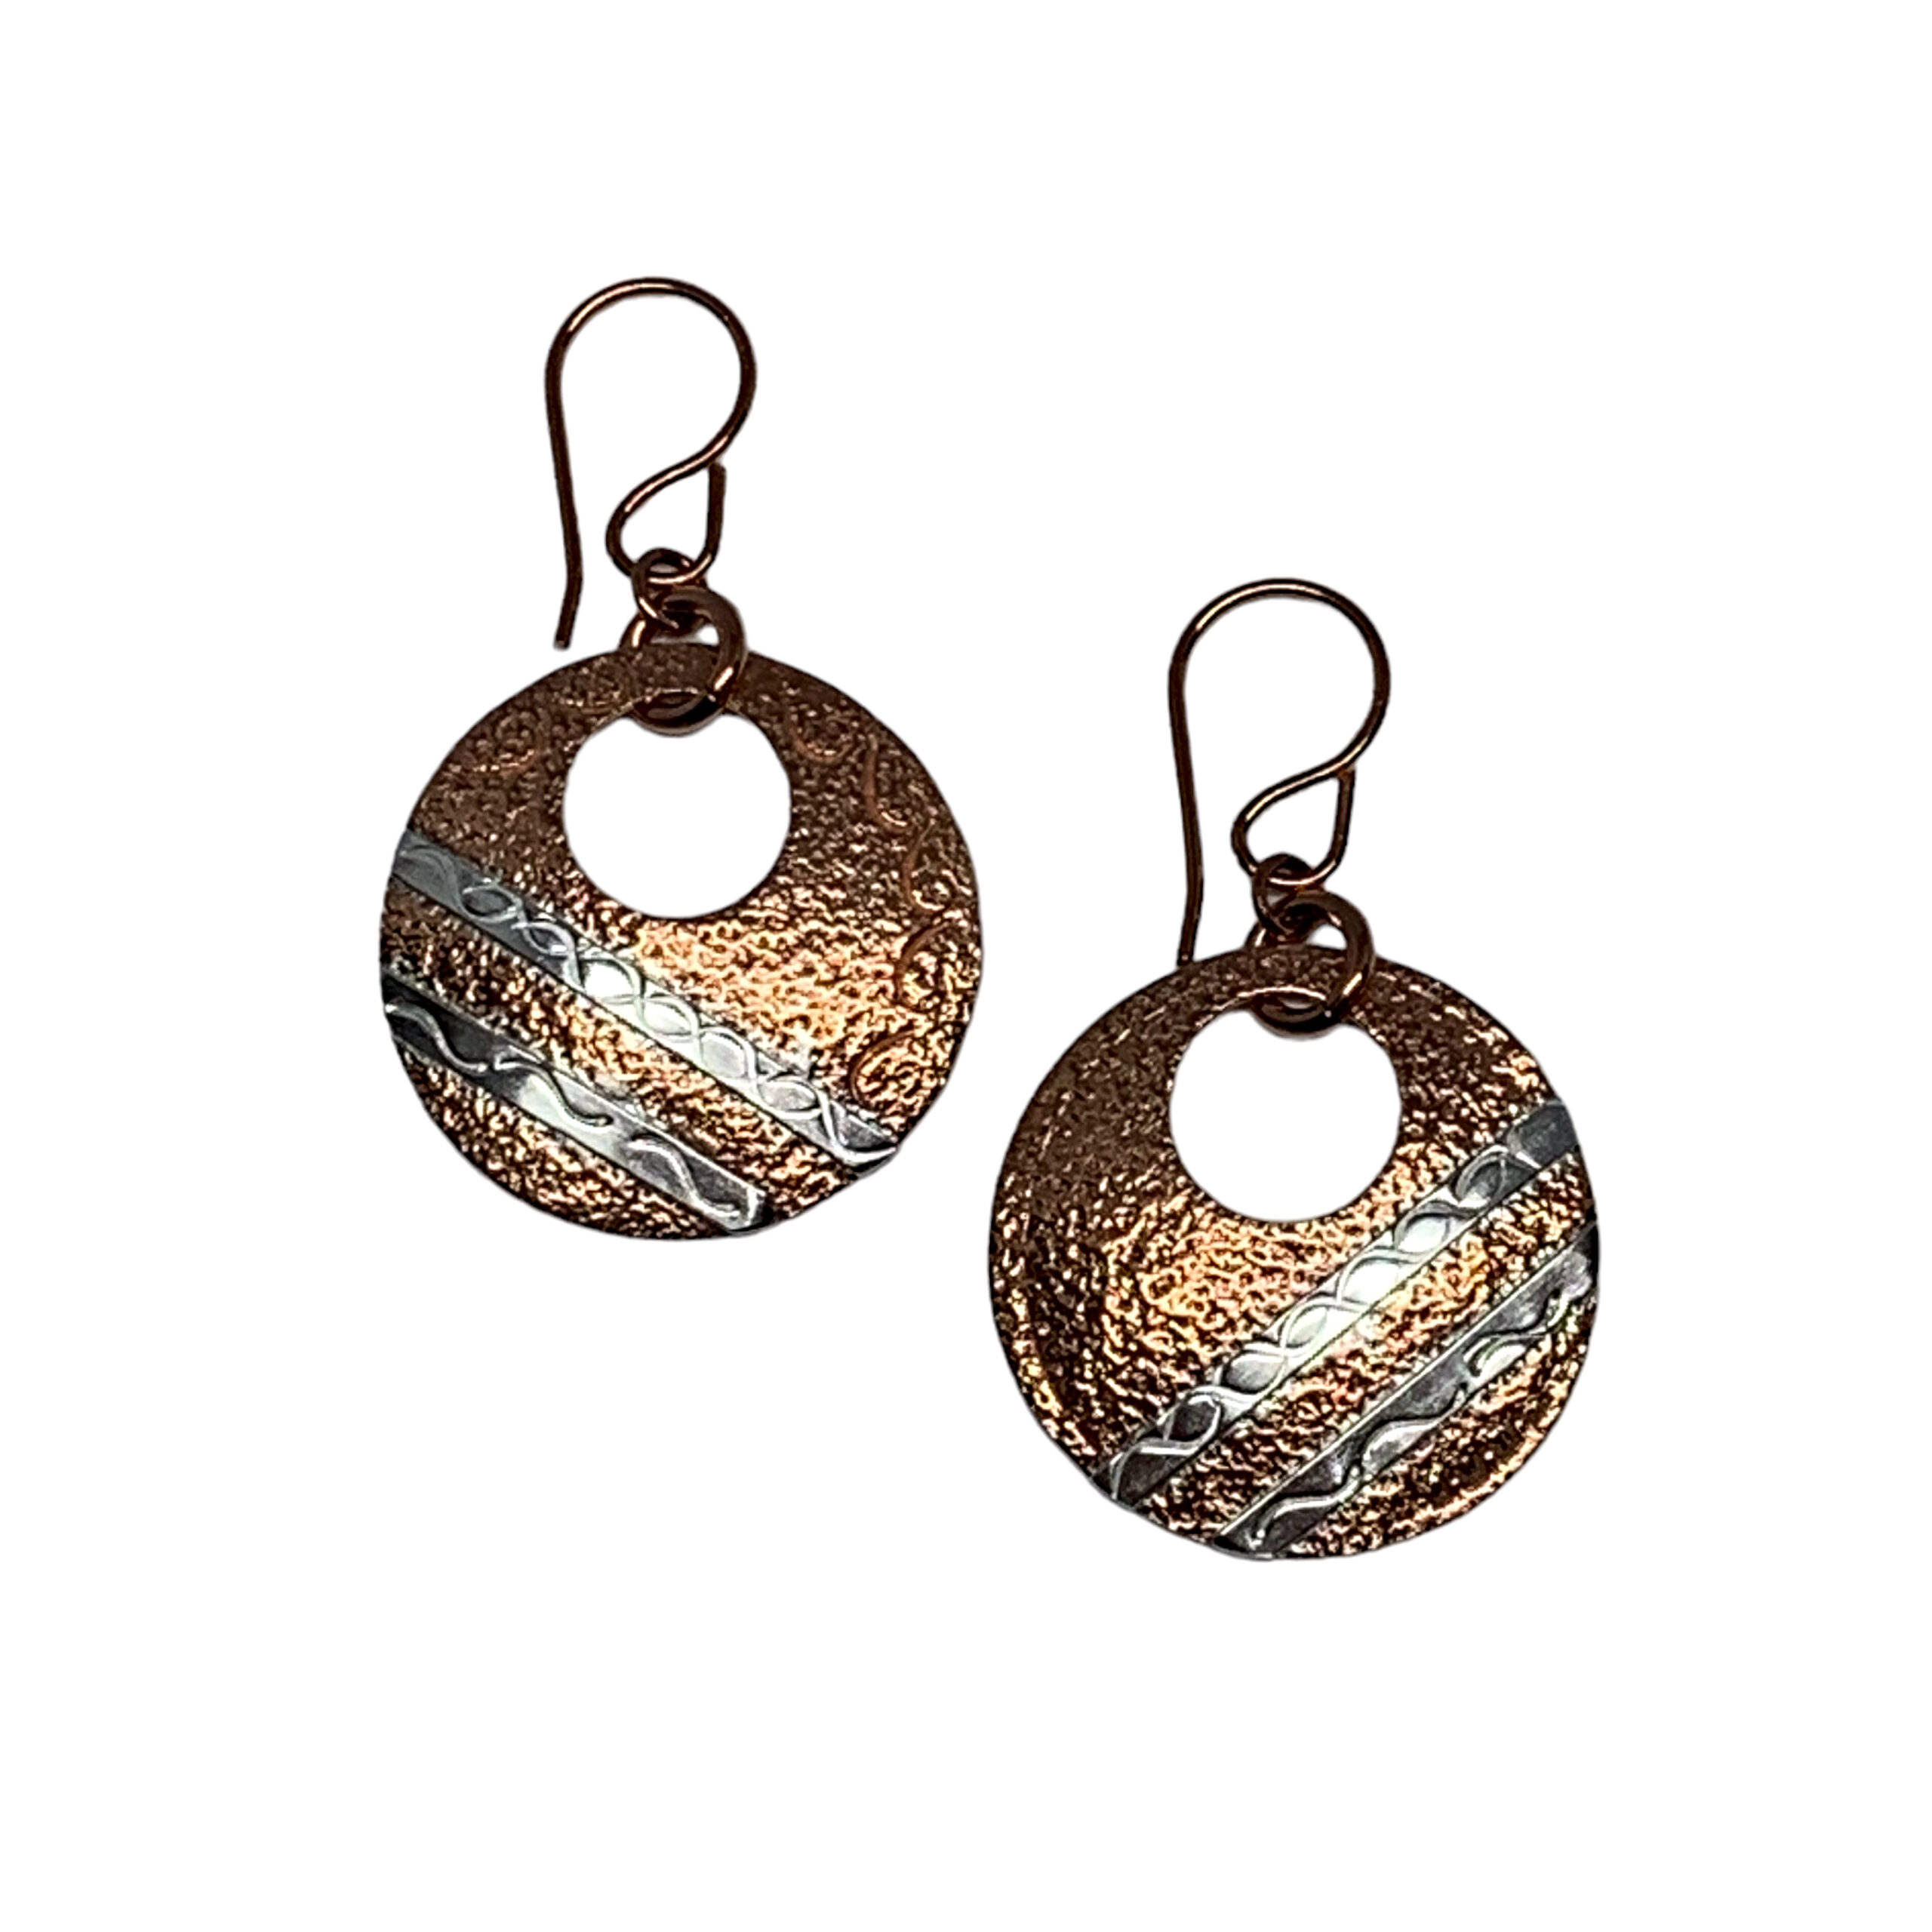 Handmade silver + copper earrings by A&R Jewellery at Effusion Art Gallery in Invermere, BC.